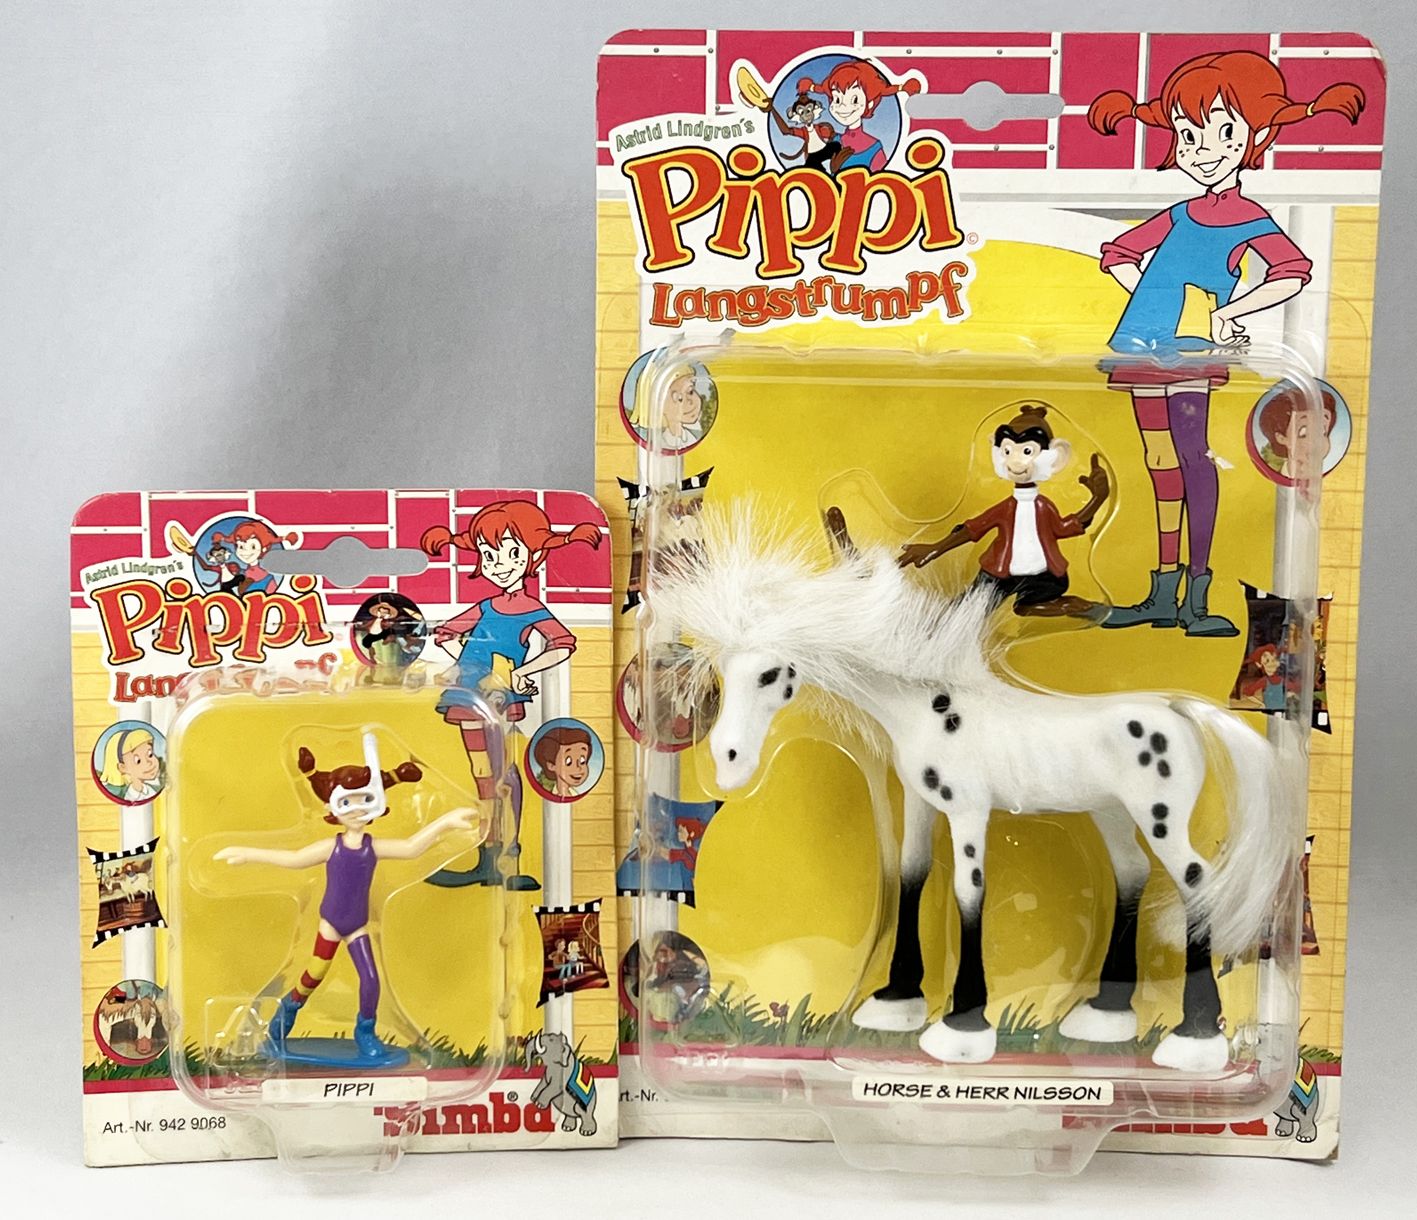 Versnellen moe Koppeling Pipi Langstrumpf - Simba Toys PVC figure - Pipi (in beach outfit), Herr  Nilsson and Horse